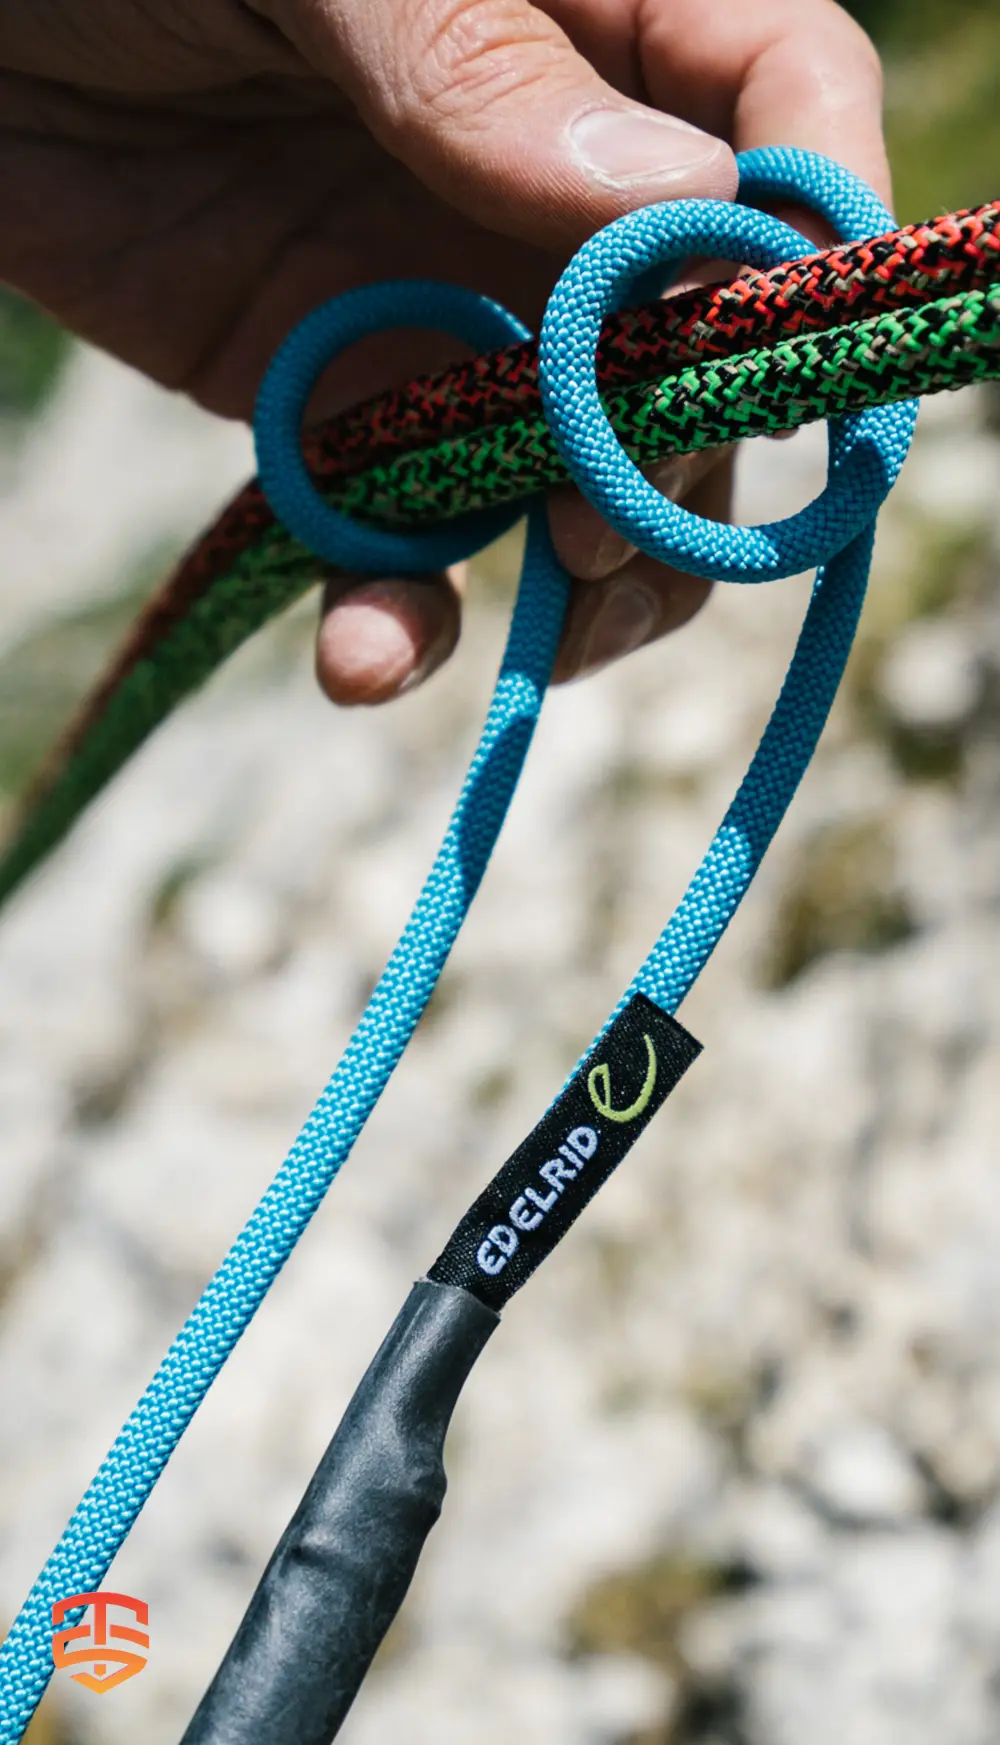 Edelrid Aramid Cord Sling 6 mm - Wholesale prices - Worldwide shipping